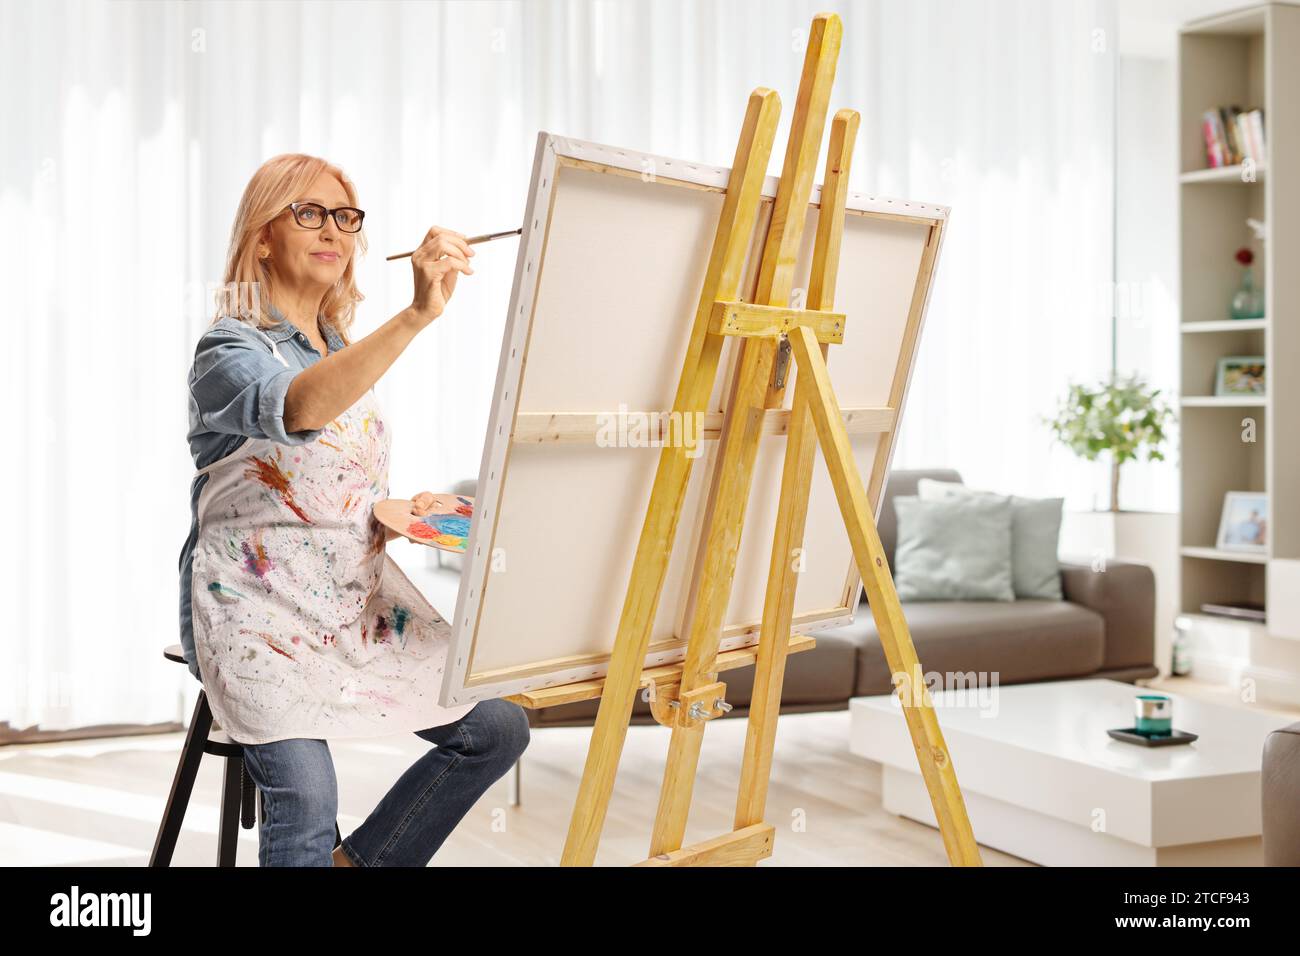 Woman holding a painting brush and palette with acrylic paint and painting at home Stock Photo